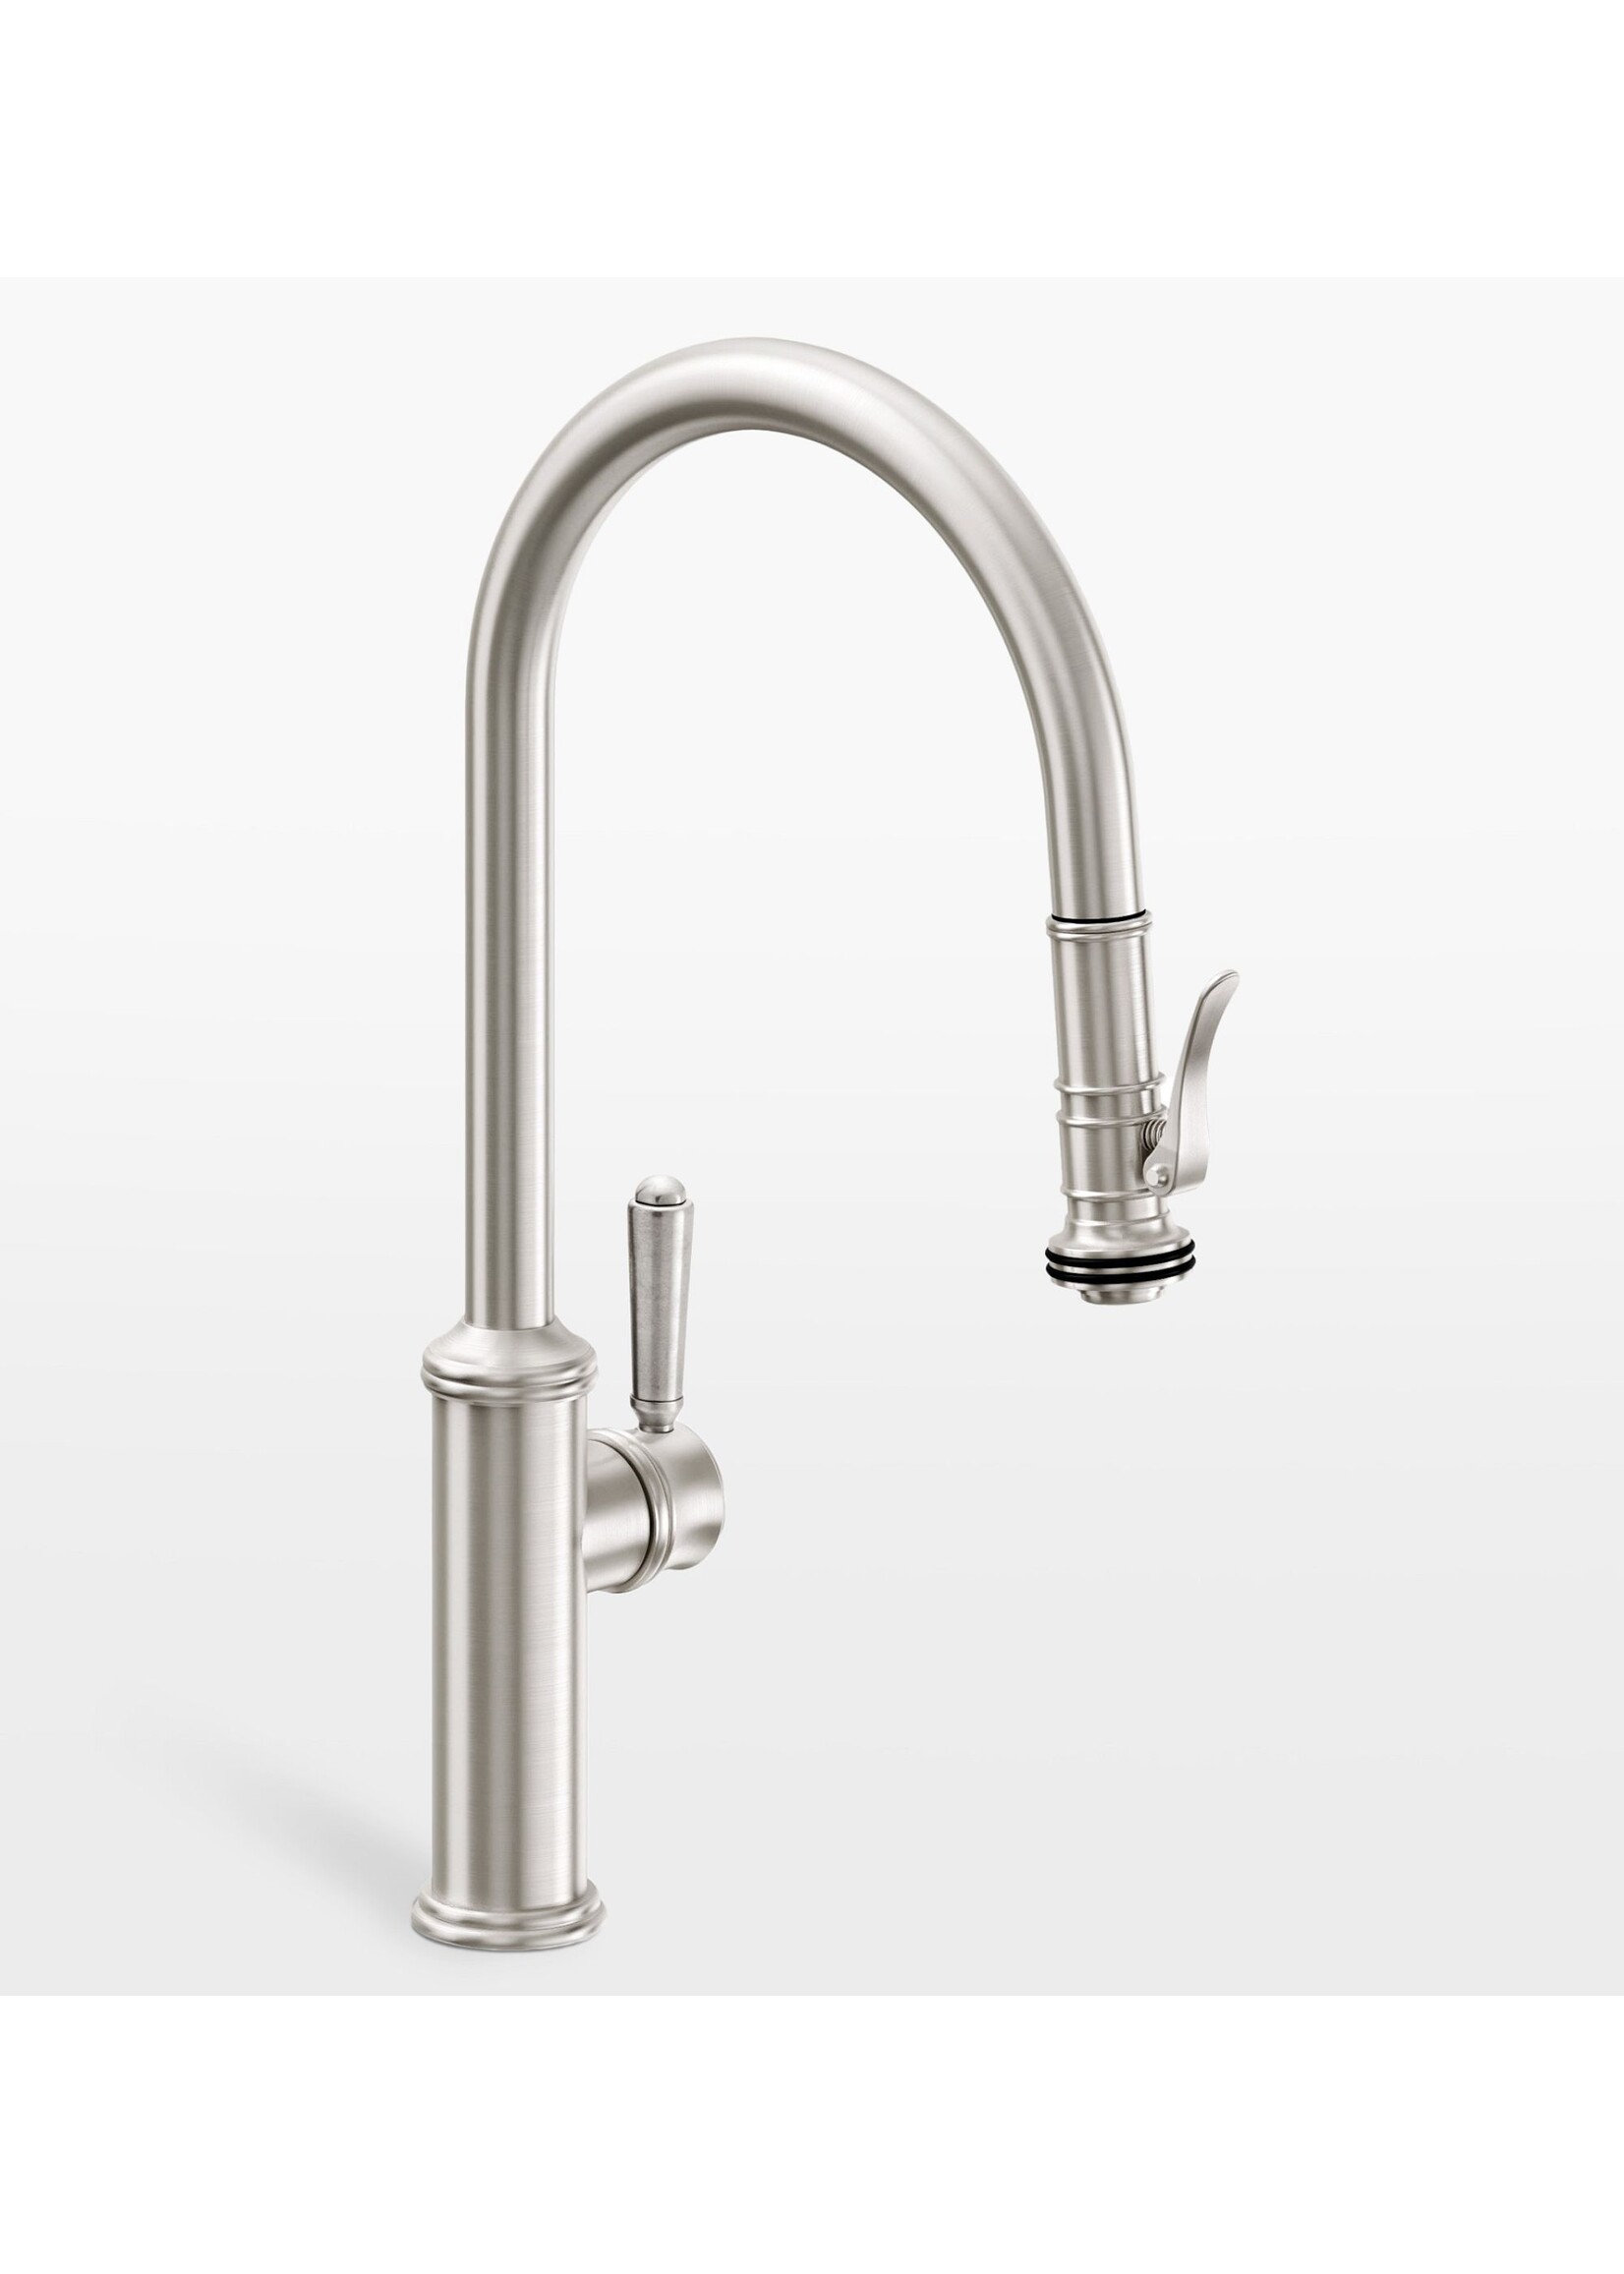 California Faucets California Faucets Davoli pull down kitchen faucet Low Arc Spout w/ Squeeze sprayer Custom HDL- PC